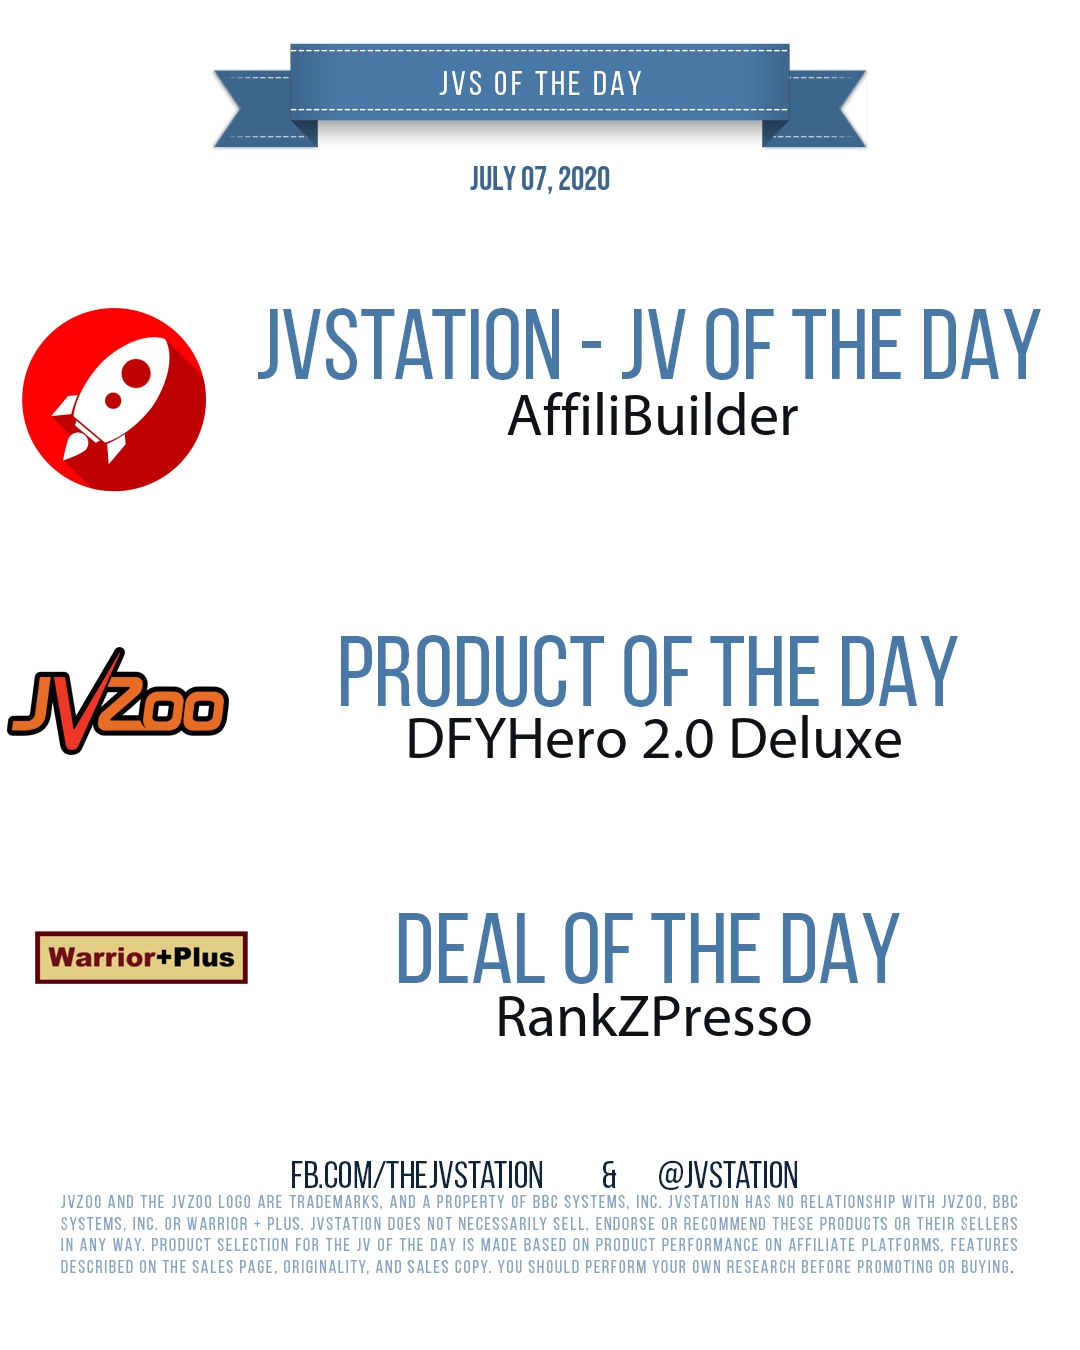 JVs of the day - July 07, 2020